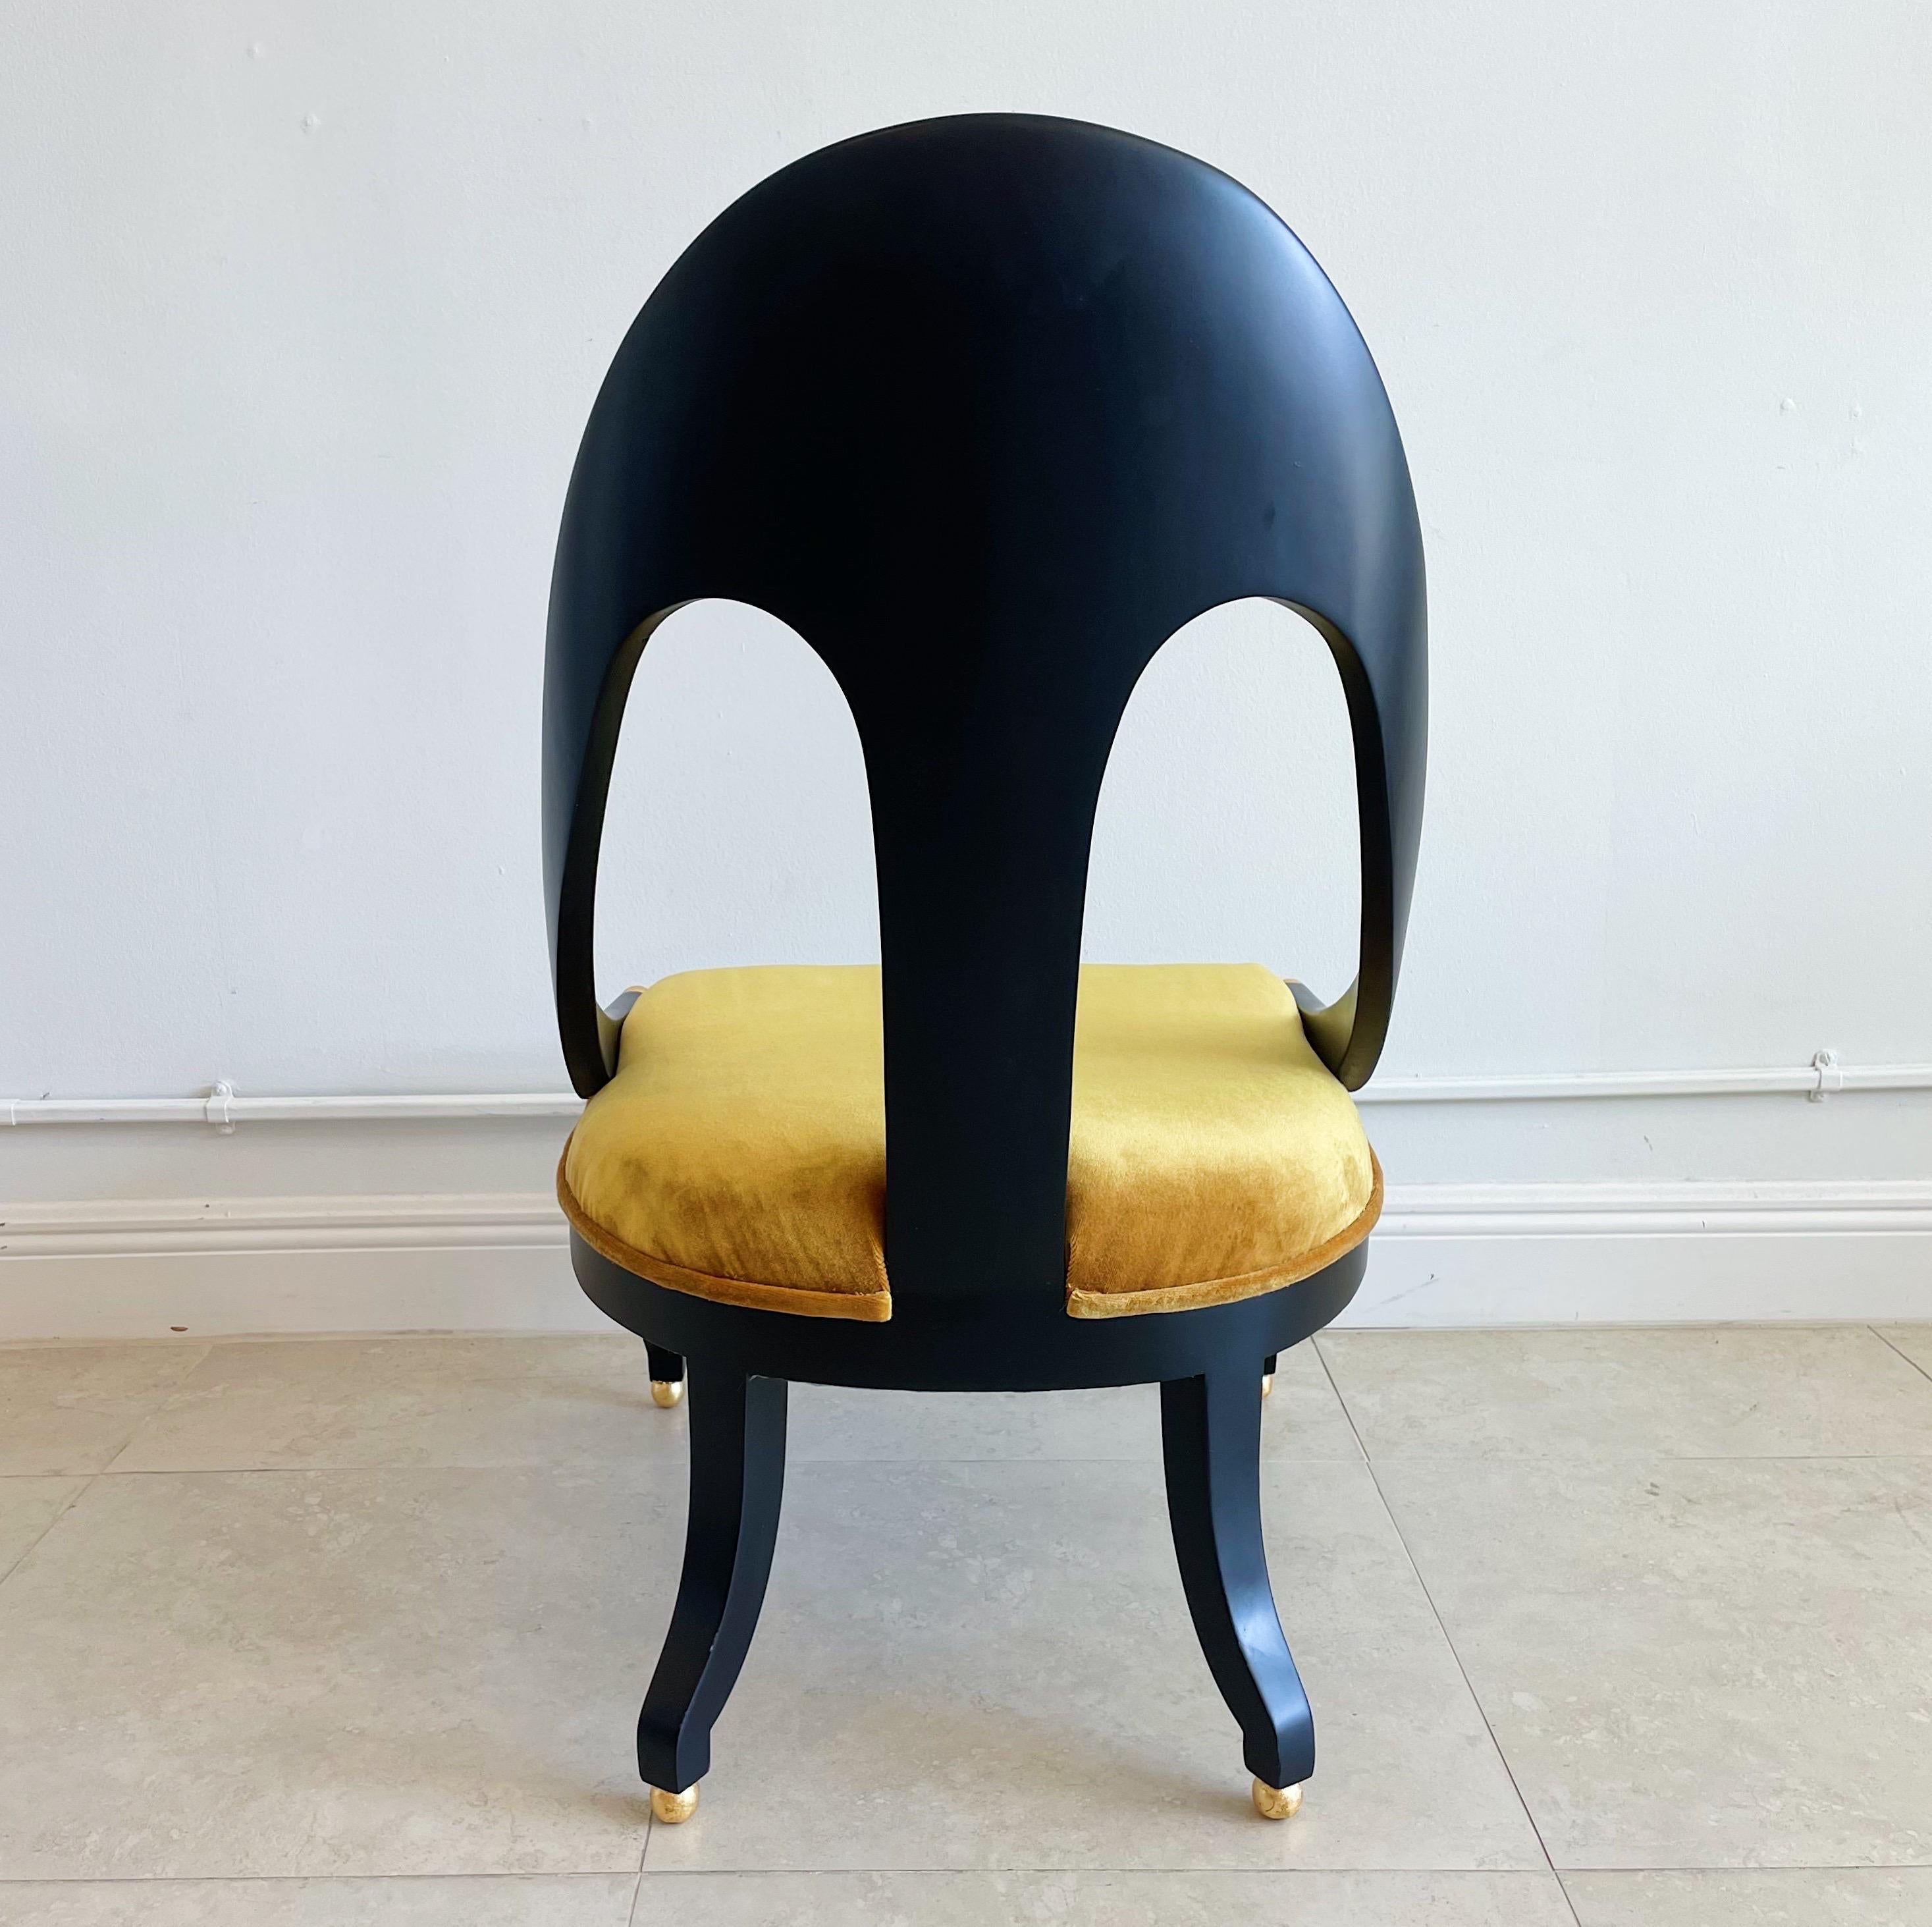 Delightful of slipper chairs by Michael Taylor for Baker Furniture Company. Newly refinished in 25% matte black lacquer with gold leaf accent balls on the feet and end of the arm rests. Recently upholstered in Mustard velvet over new foam and